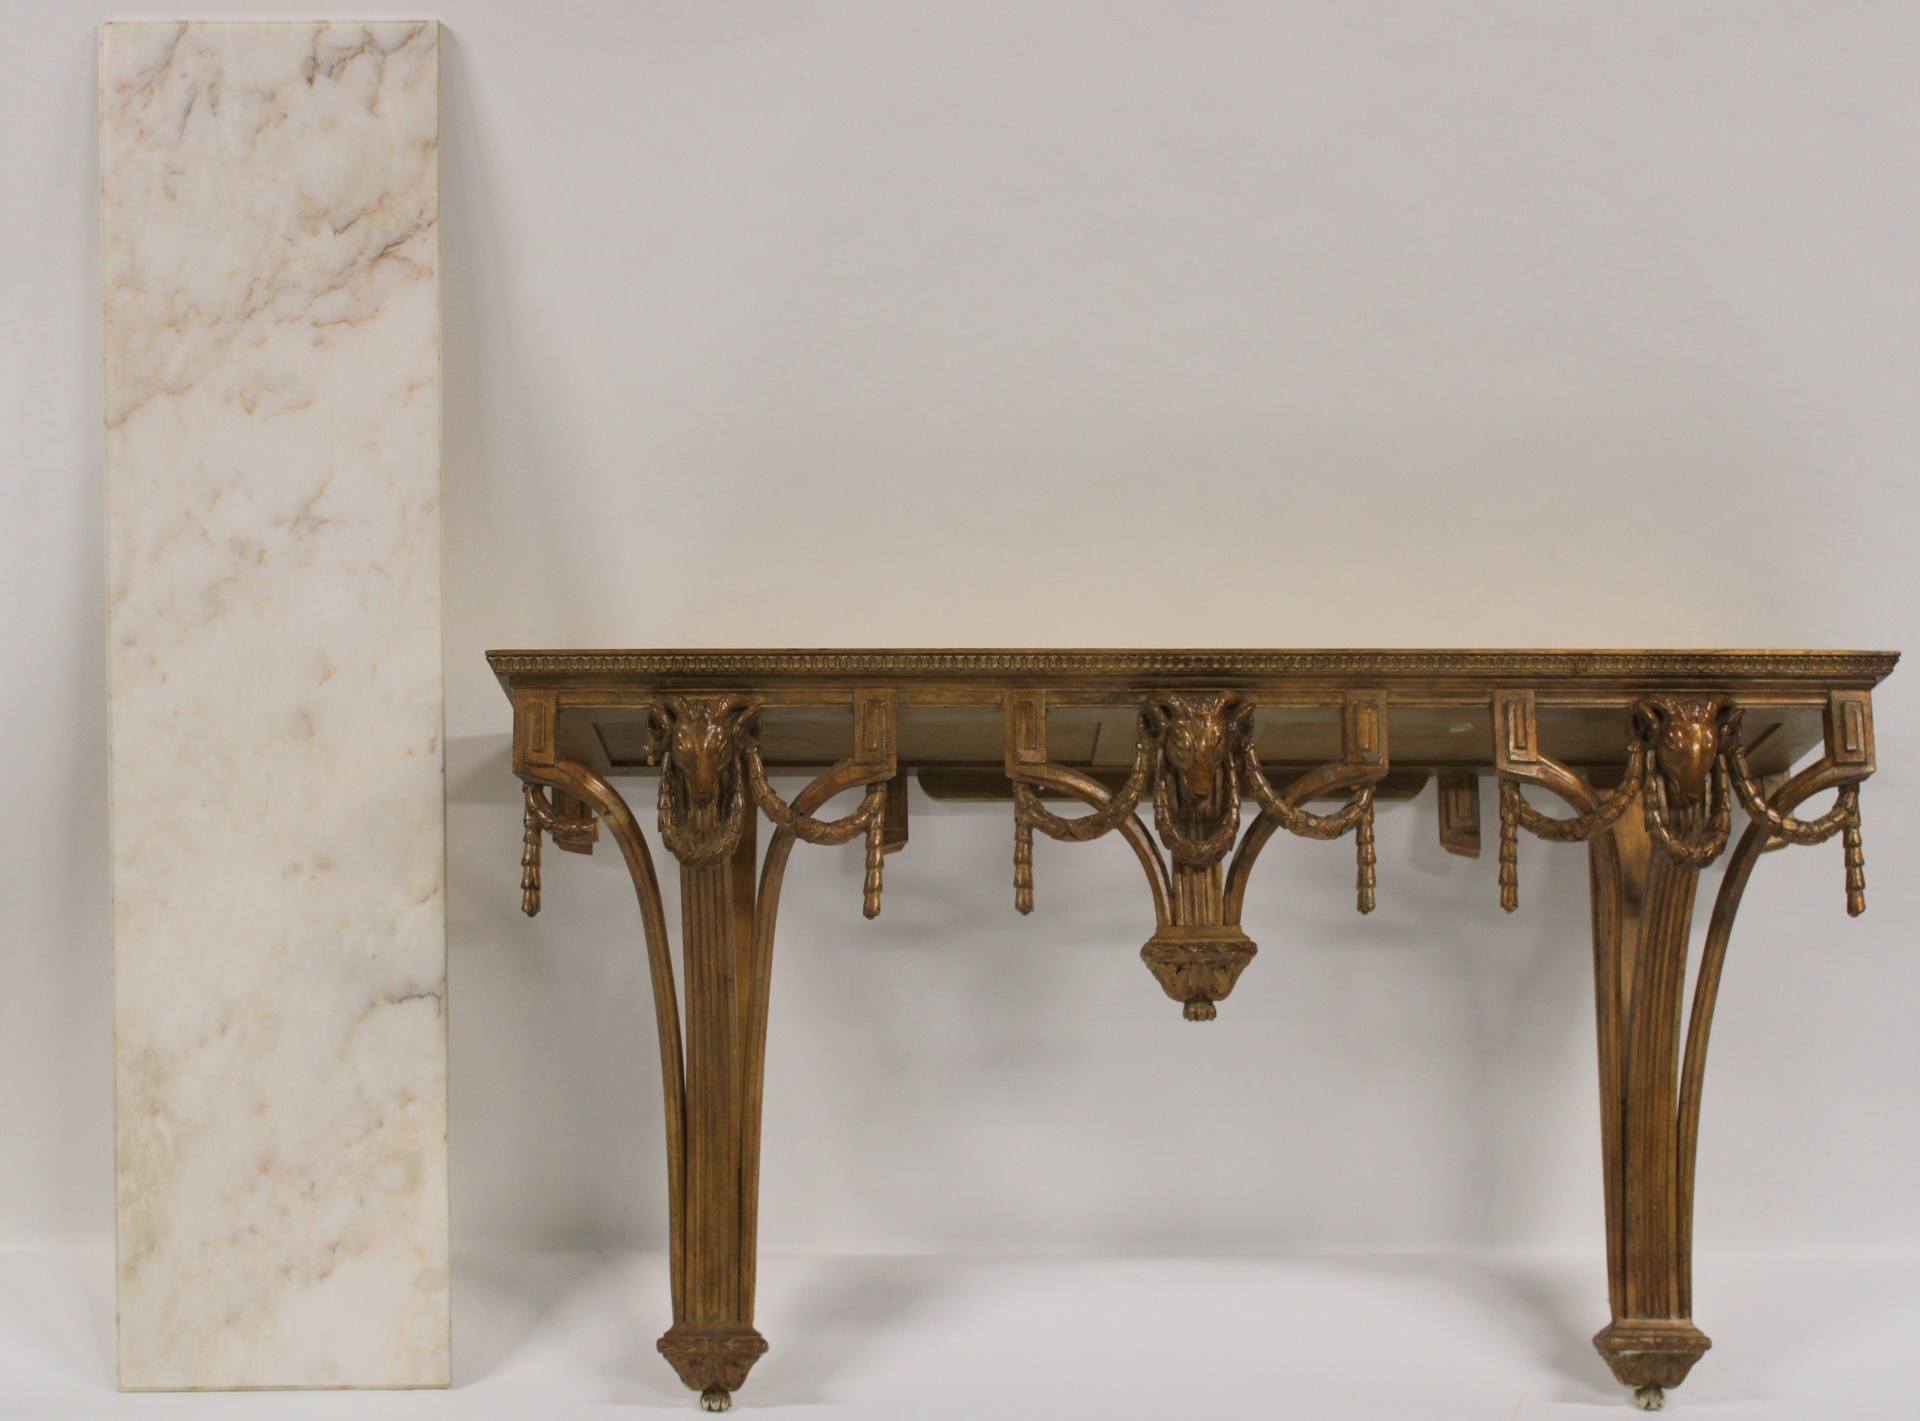 CARVED AND GILT DECORATED MARBLETOP 3bbf19